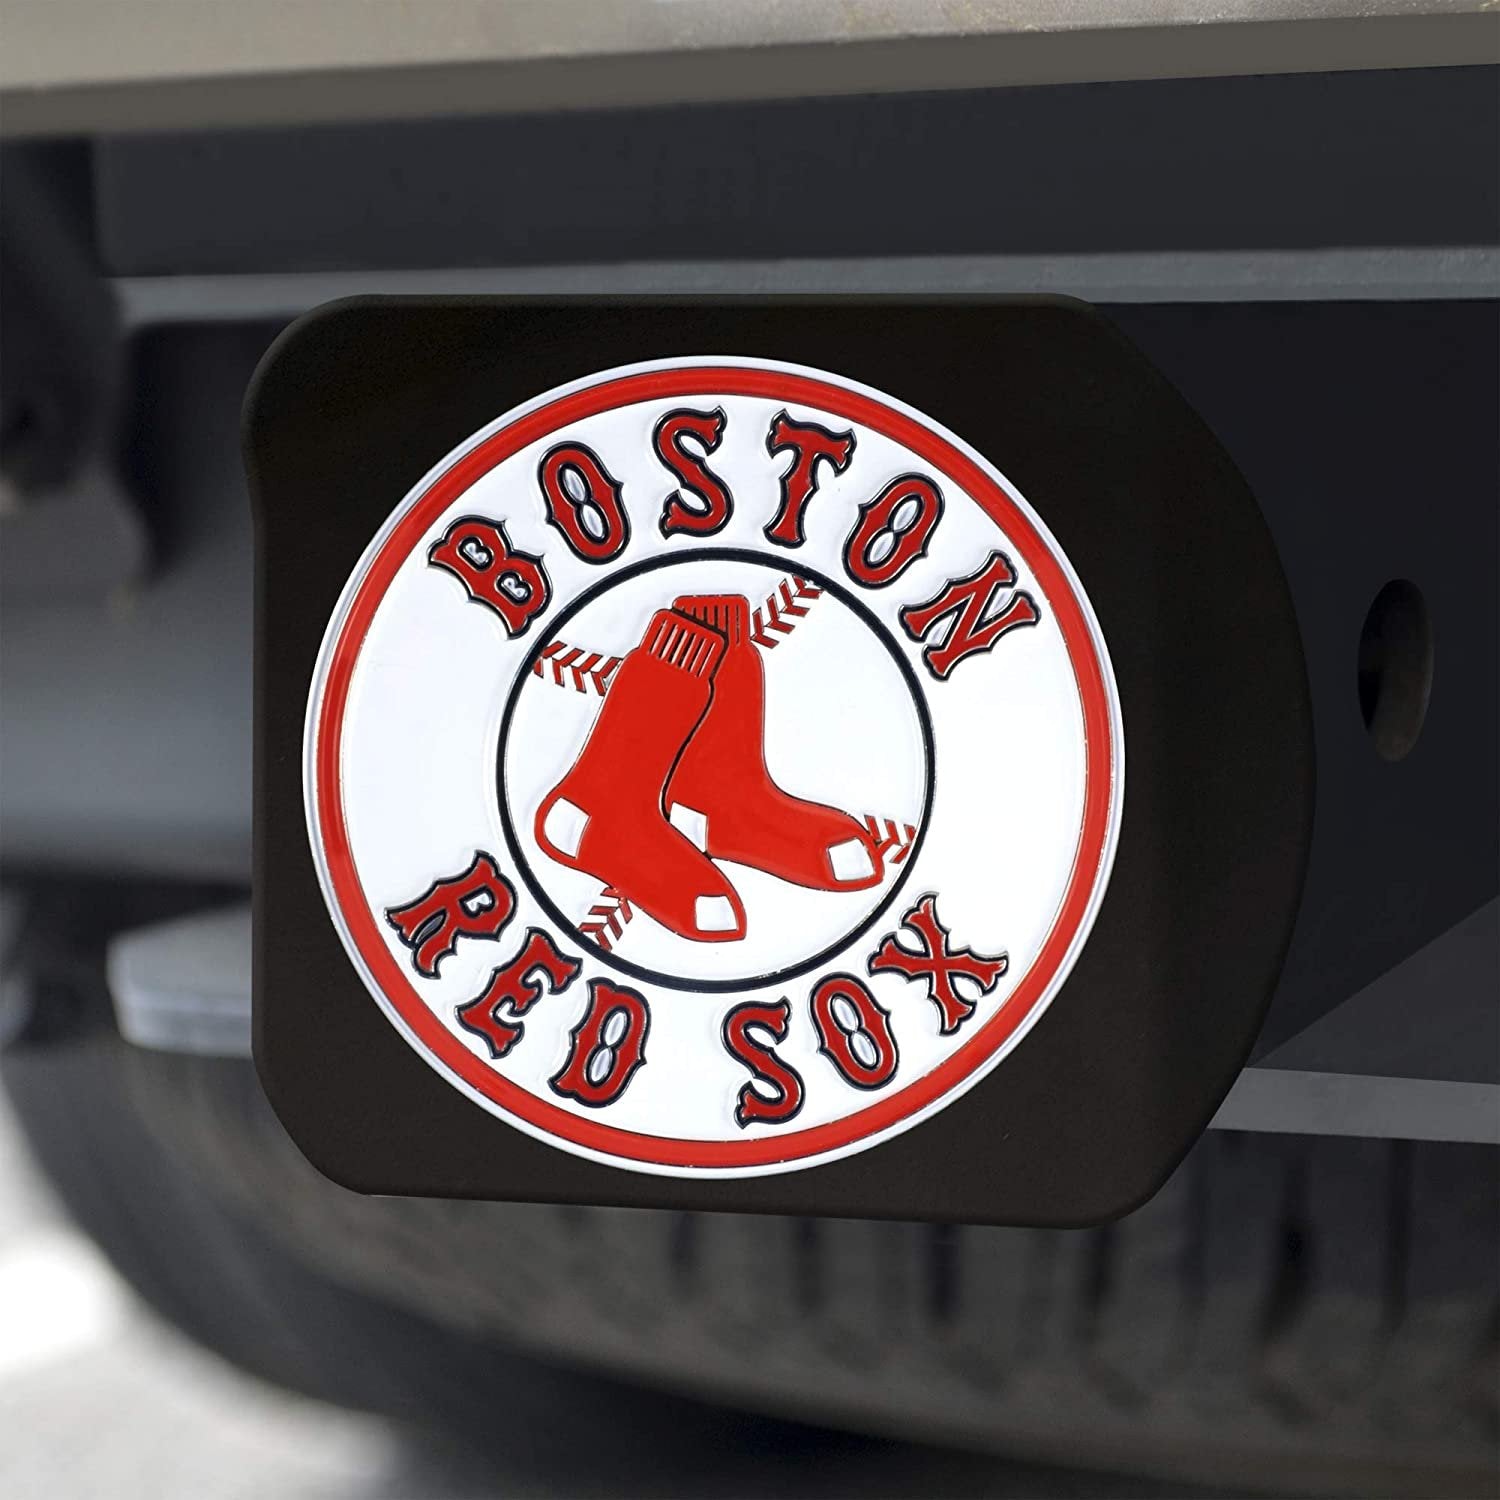 Boston Red Sox Hitch Cover Black Solid Metal with Raised Color Metal Emblem 2" Square Type III